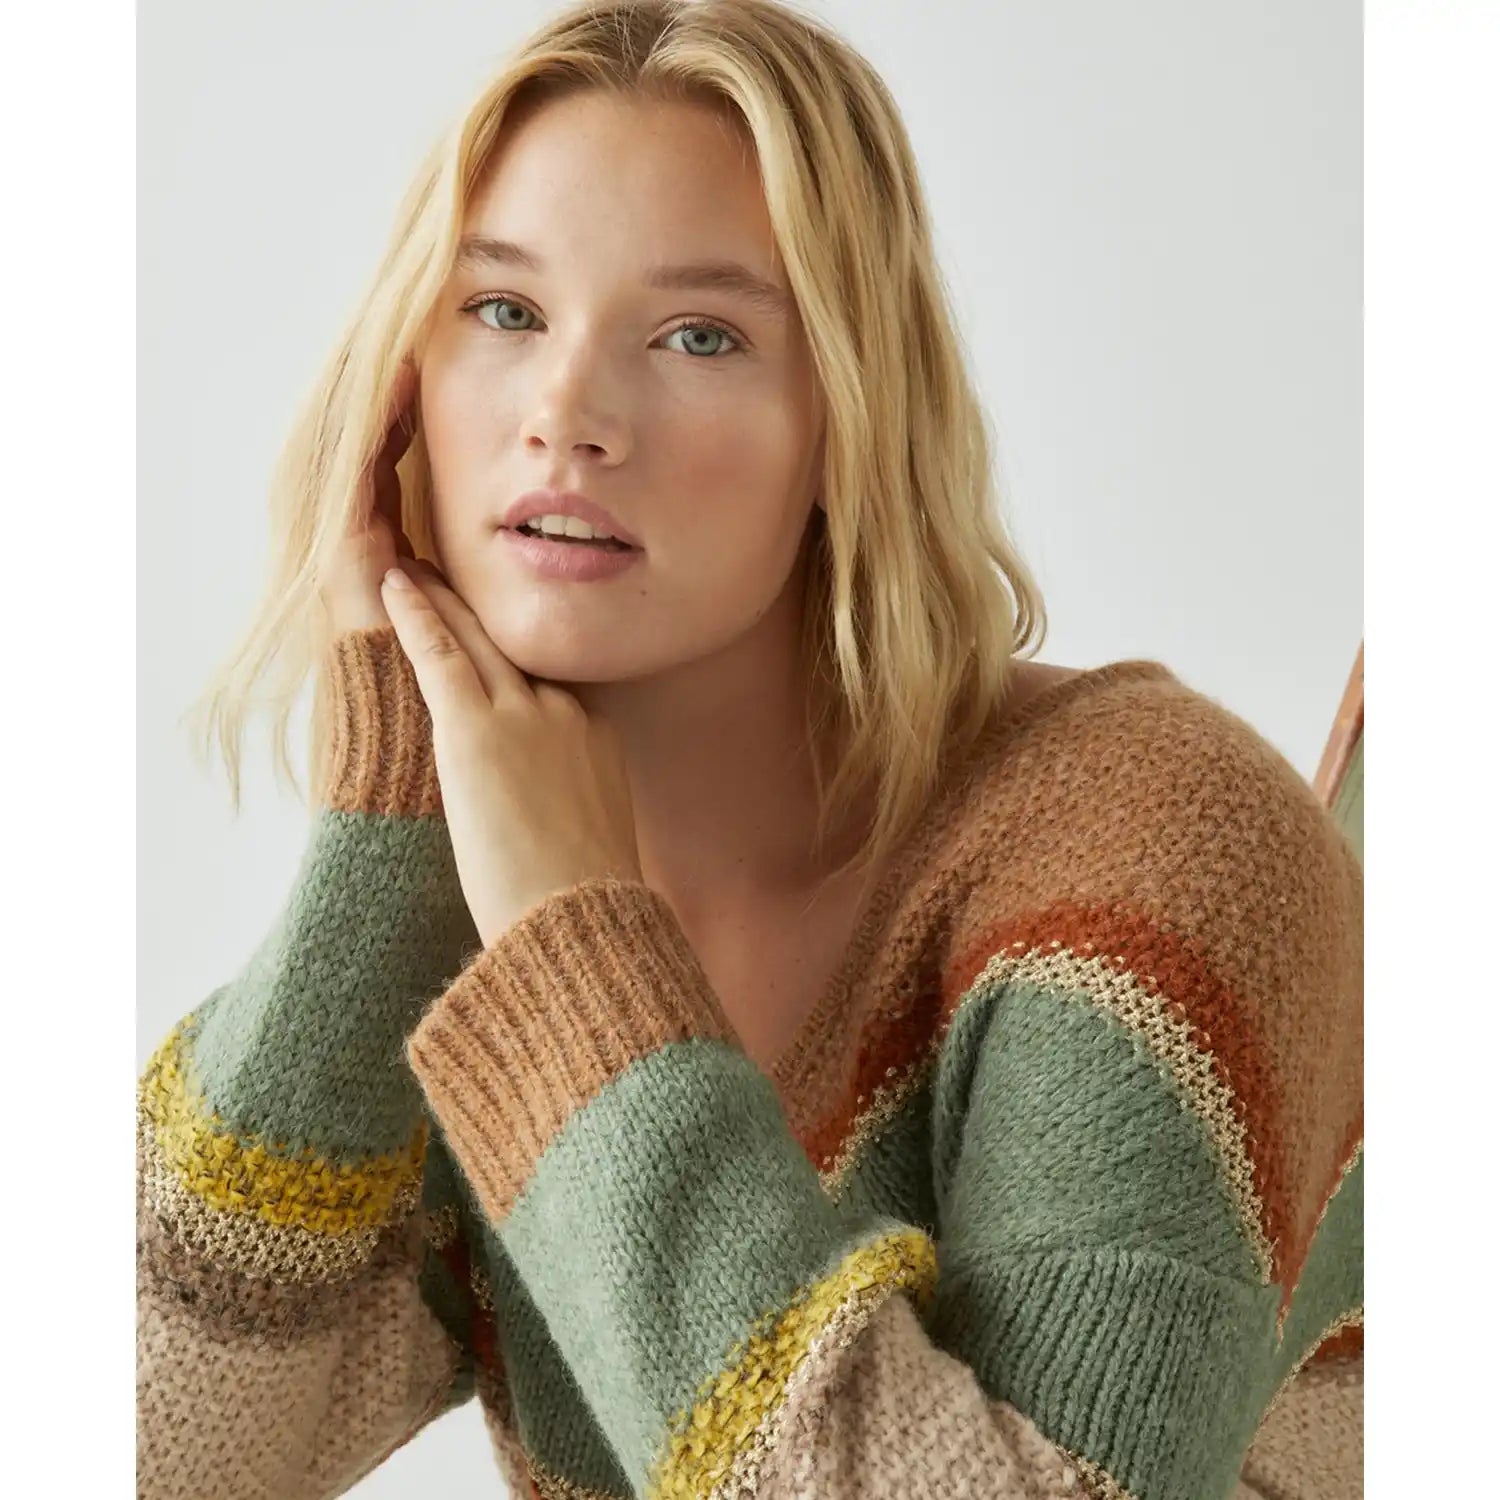 Couchel Multicolored Sweater - Multi 2 Shaws Department Stores